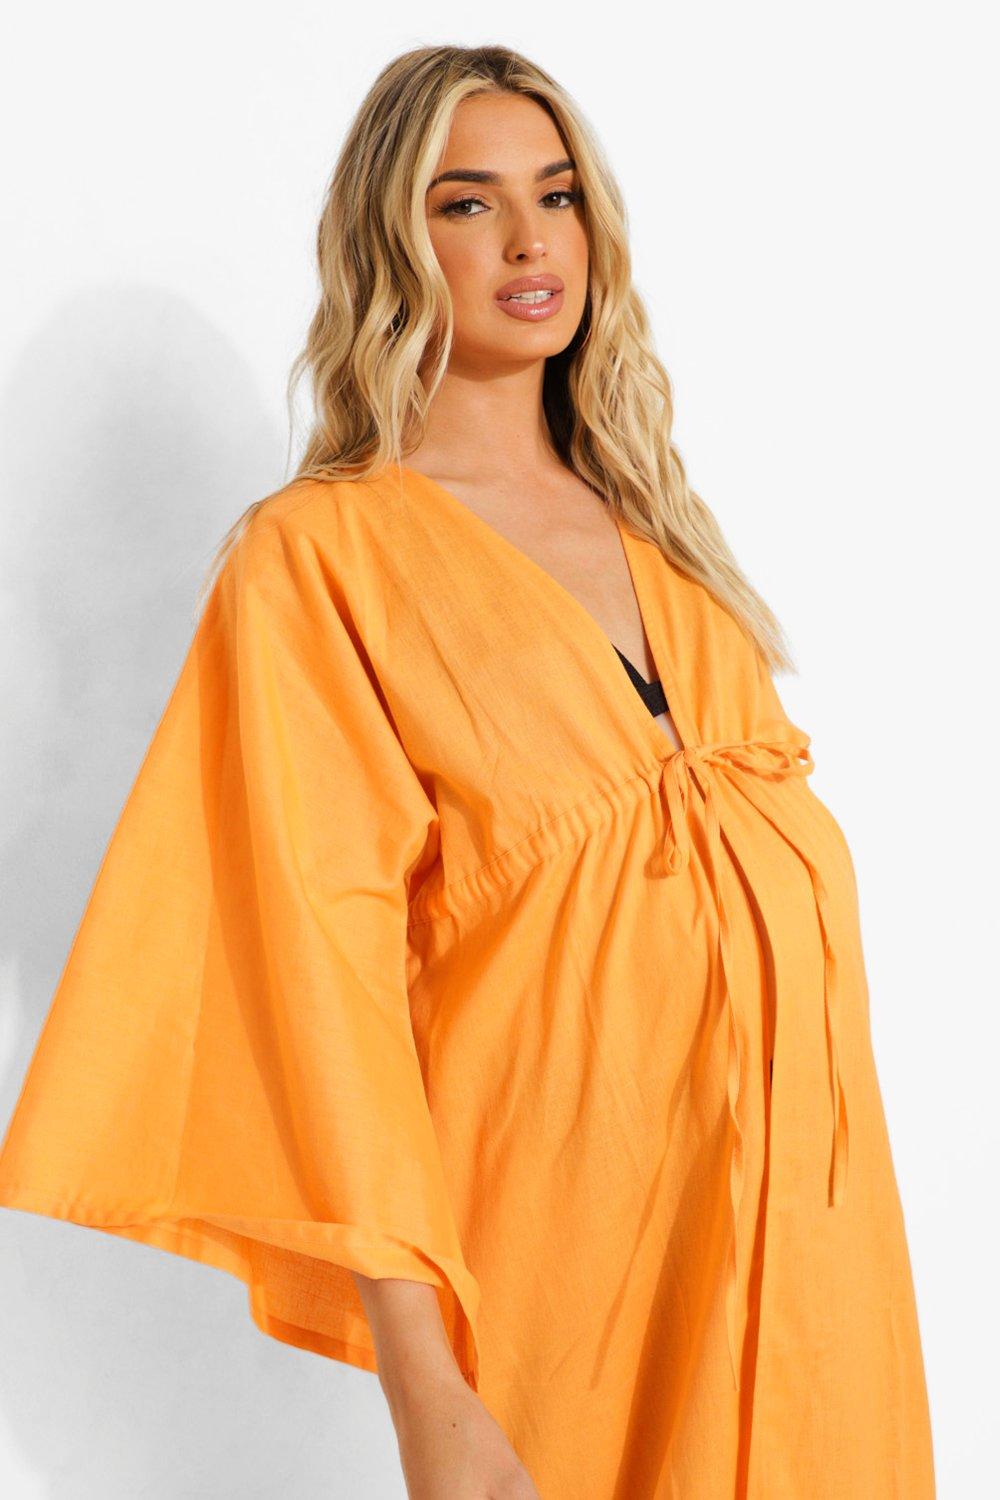 https://media.boohoo.com/i/boohoo/bzz00661_coral_xl_3/female-coral-maternity-tie-front-beach-cover-up